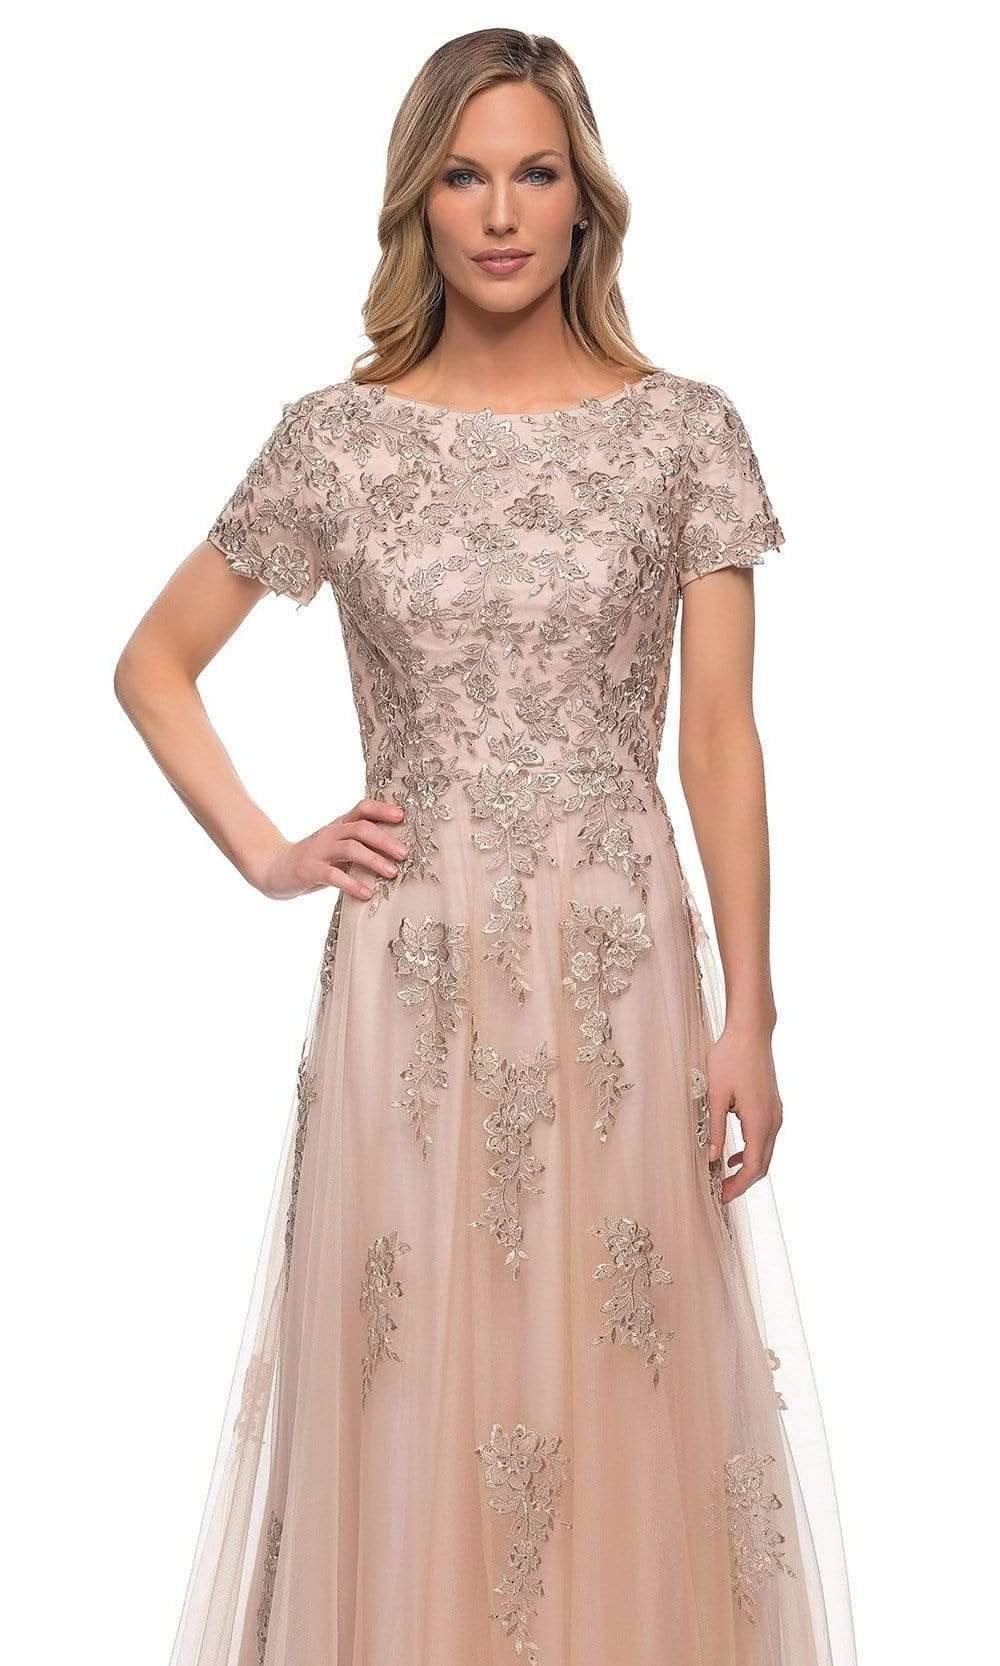 La Femme - 29290 Floral Embroidered Tulle A-line Gown Mother of the Bride Dresses